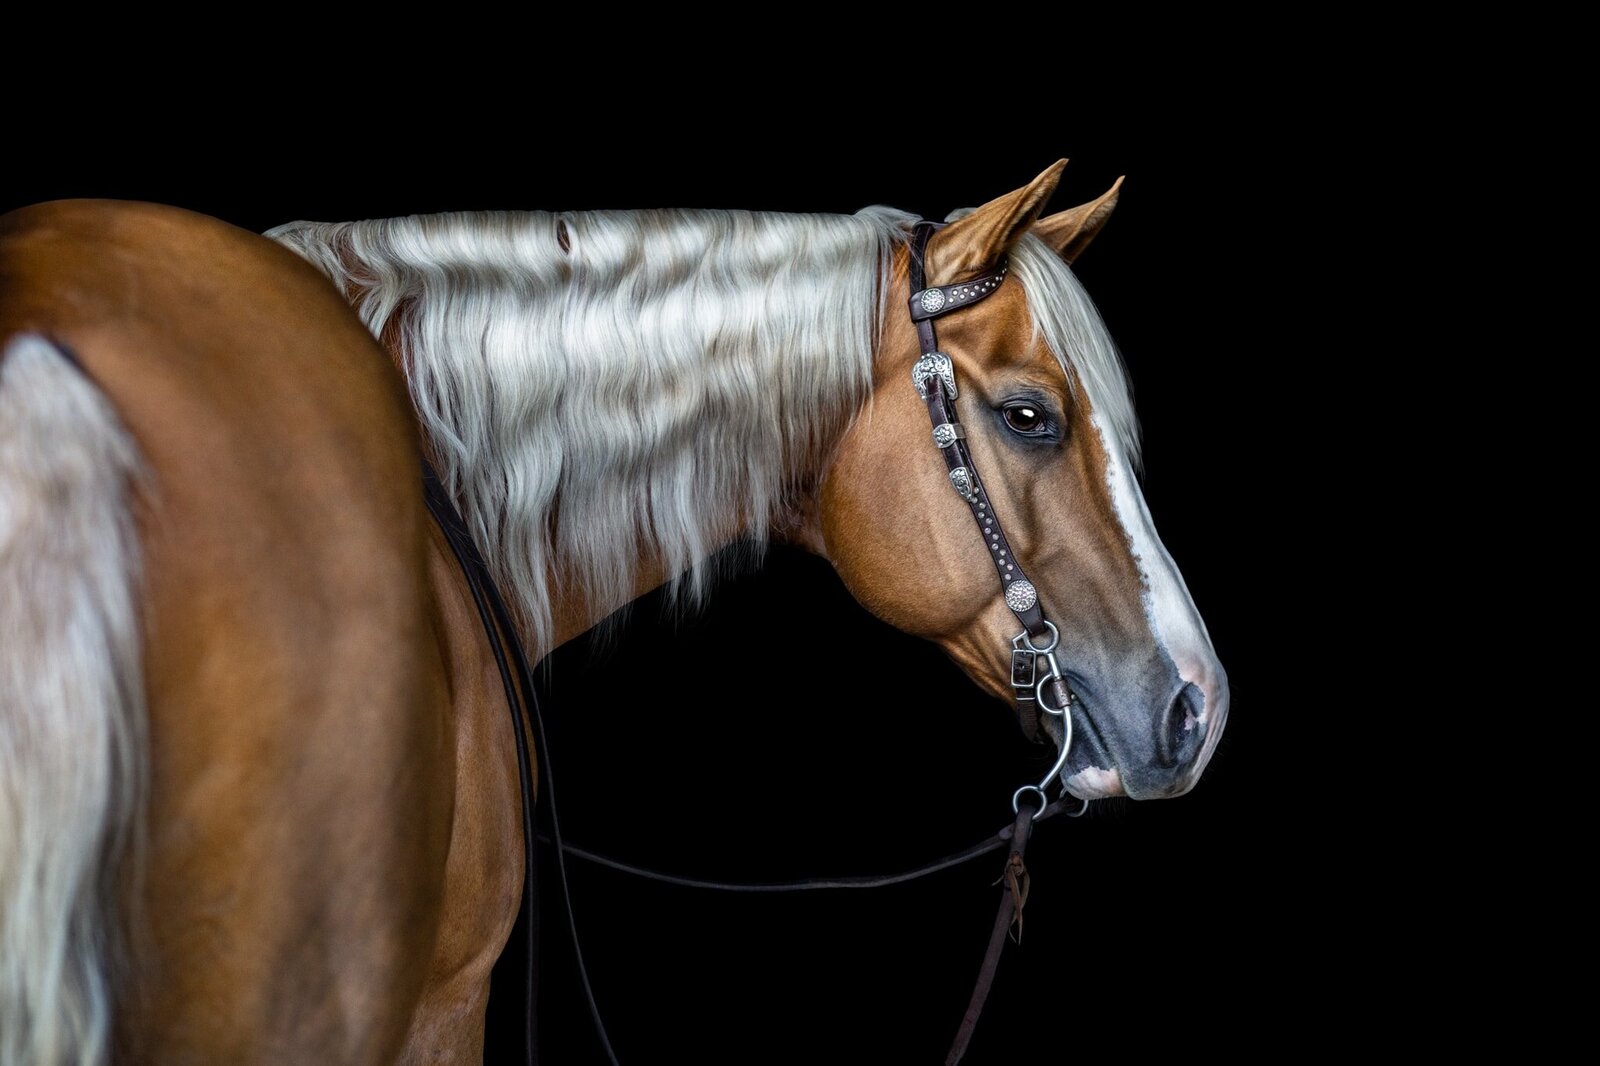 (27). Palomino horse looks behind him in black background photoshoot Half Steps Photography